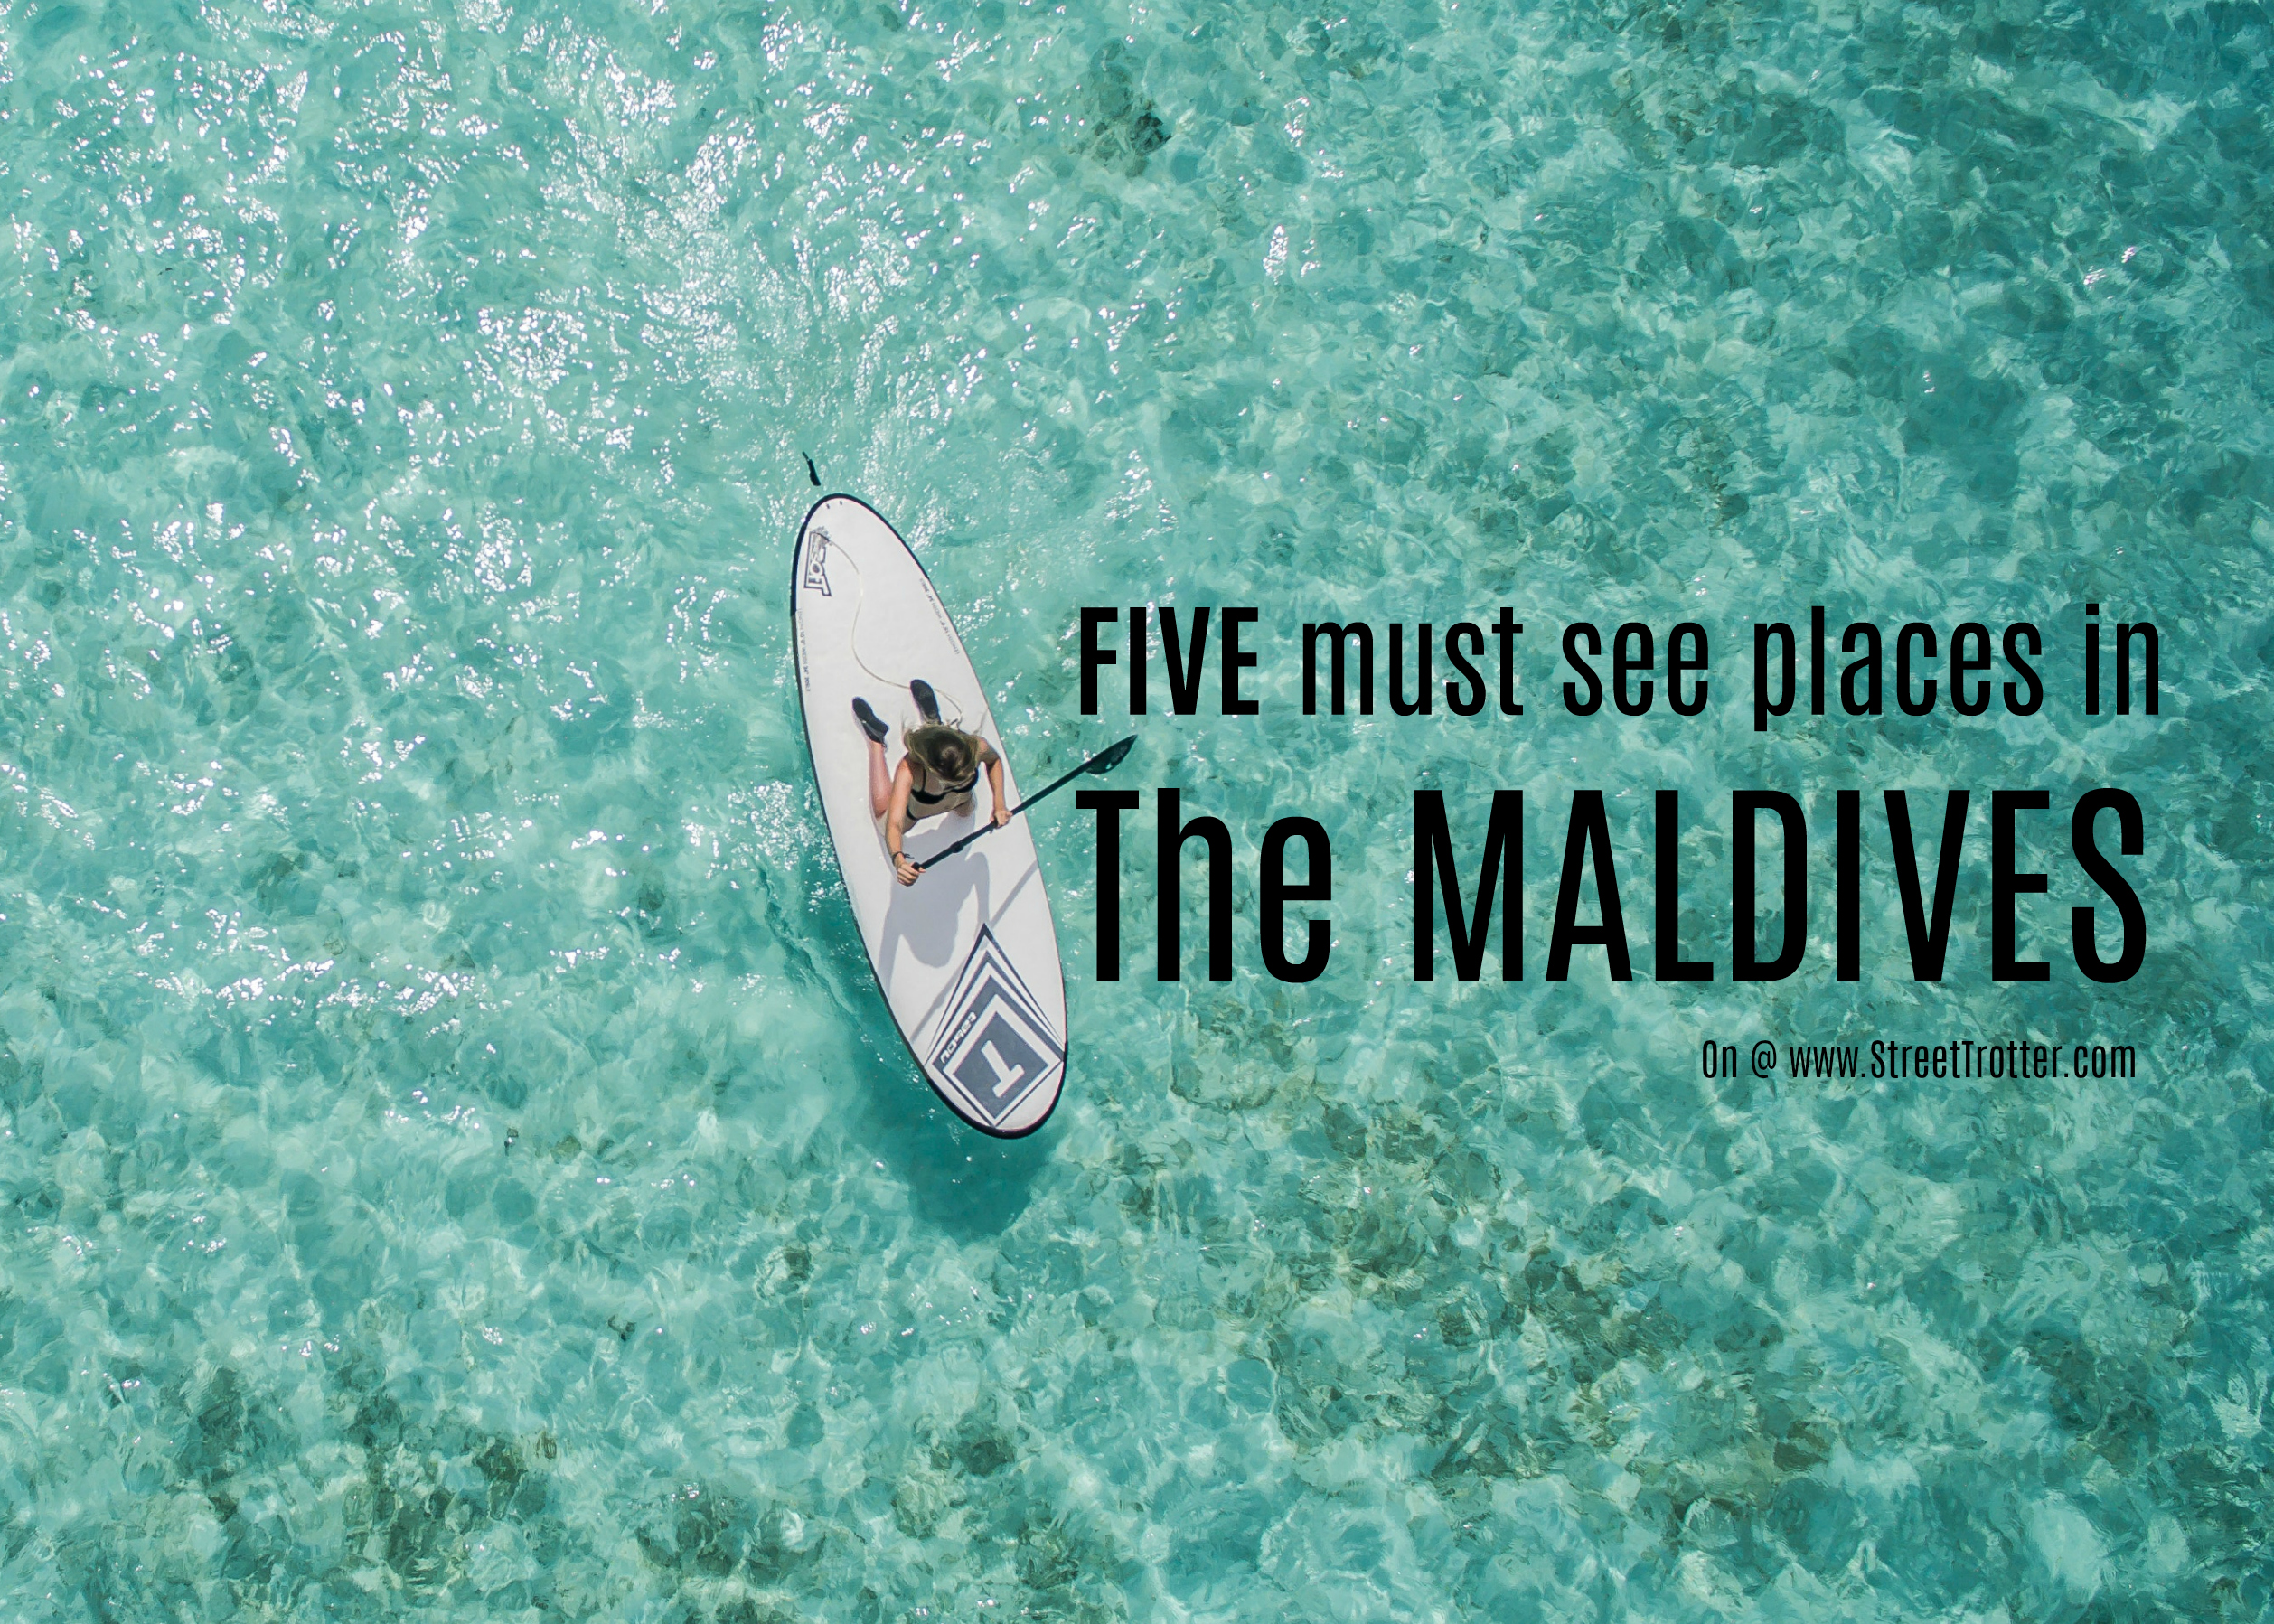 The Maldives - streettrotter